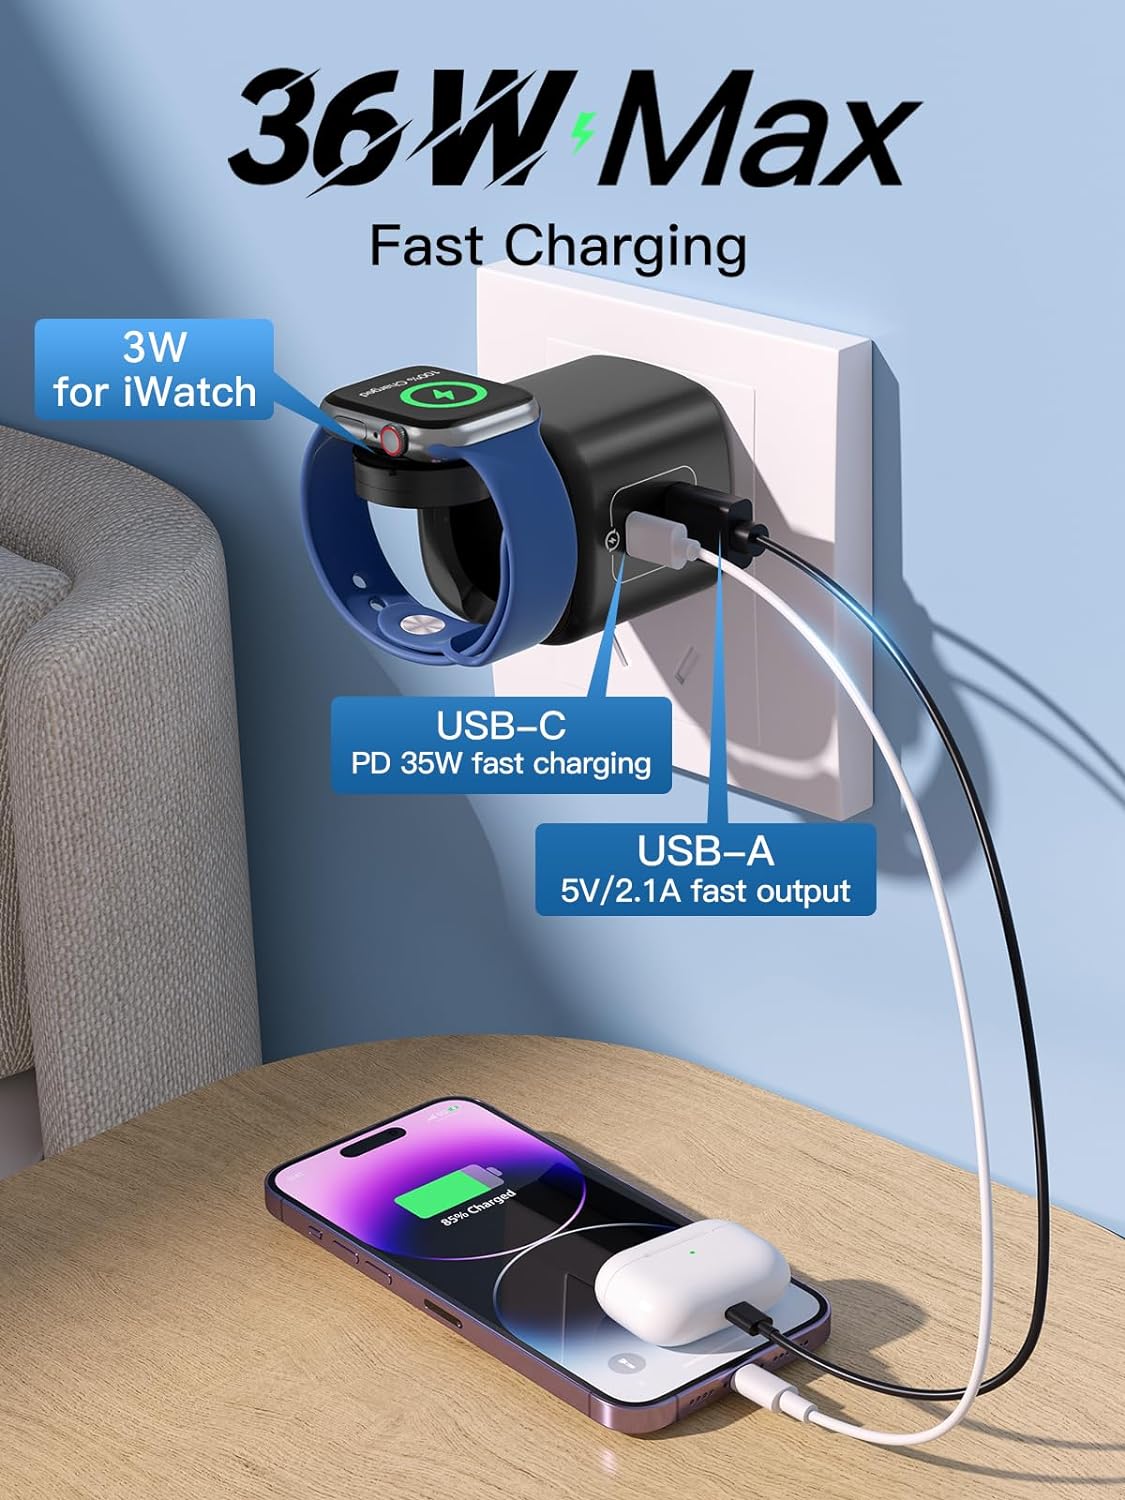 36W Portable USB C Fast Charging Block for iWatch, iPhone, iPad, Samsung, Android